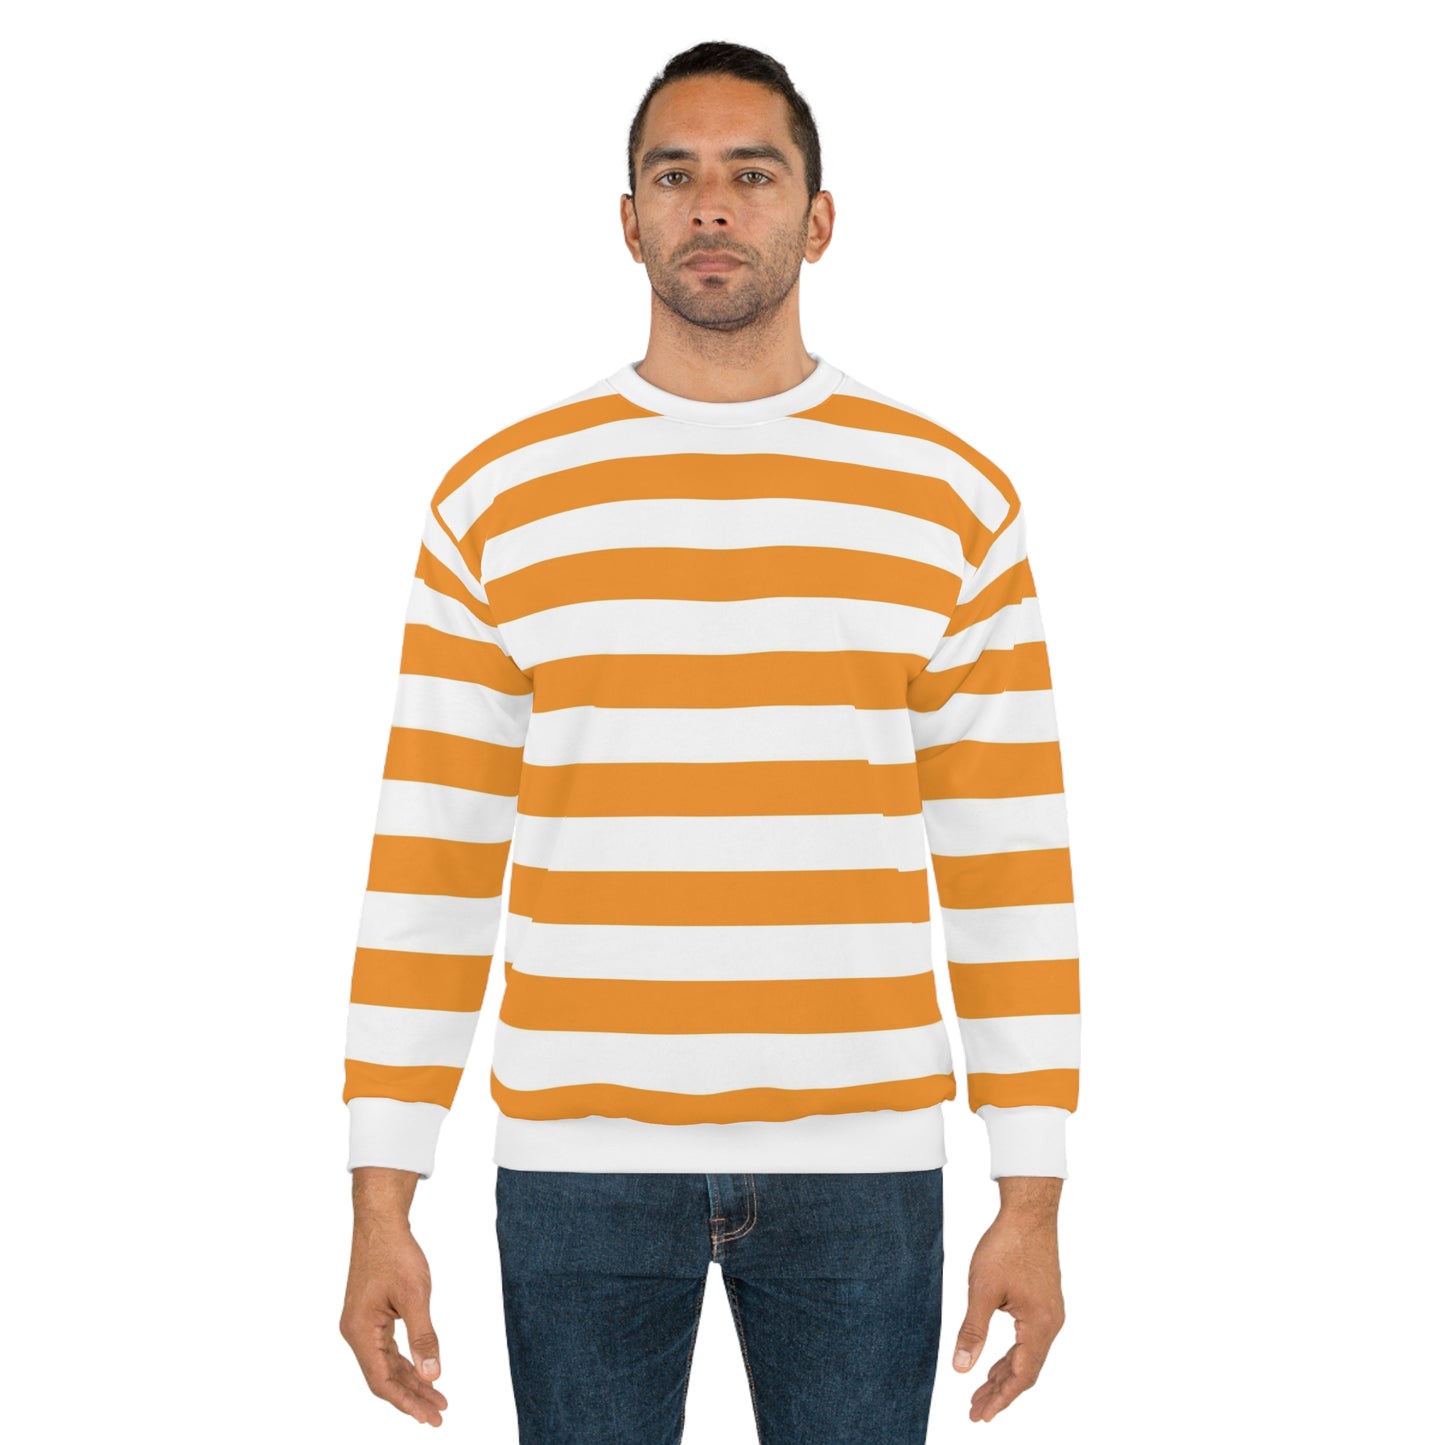 Orange Striped Sweater For Men And Woman